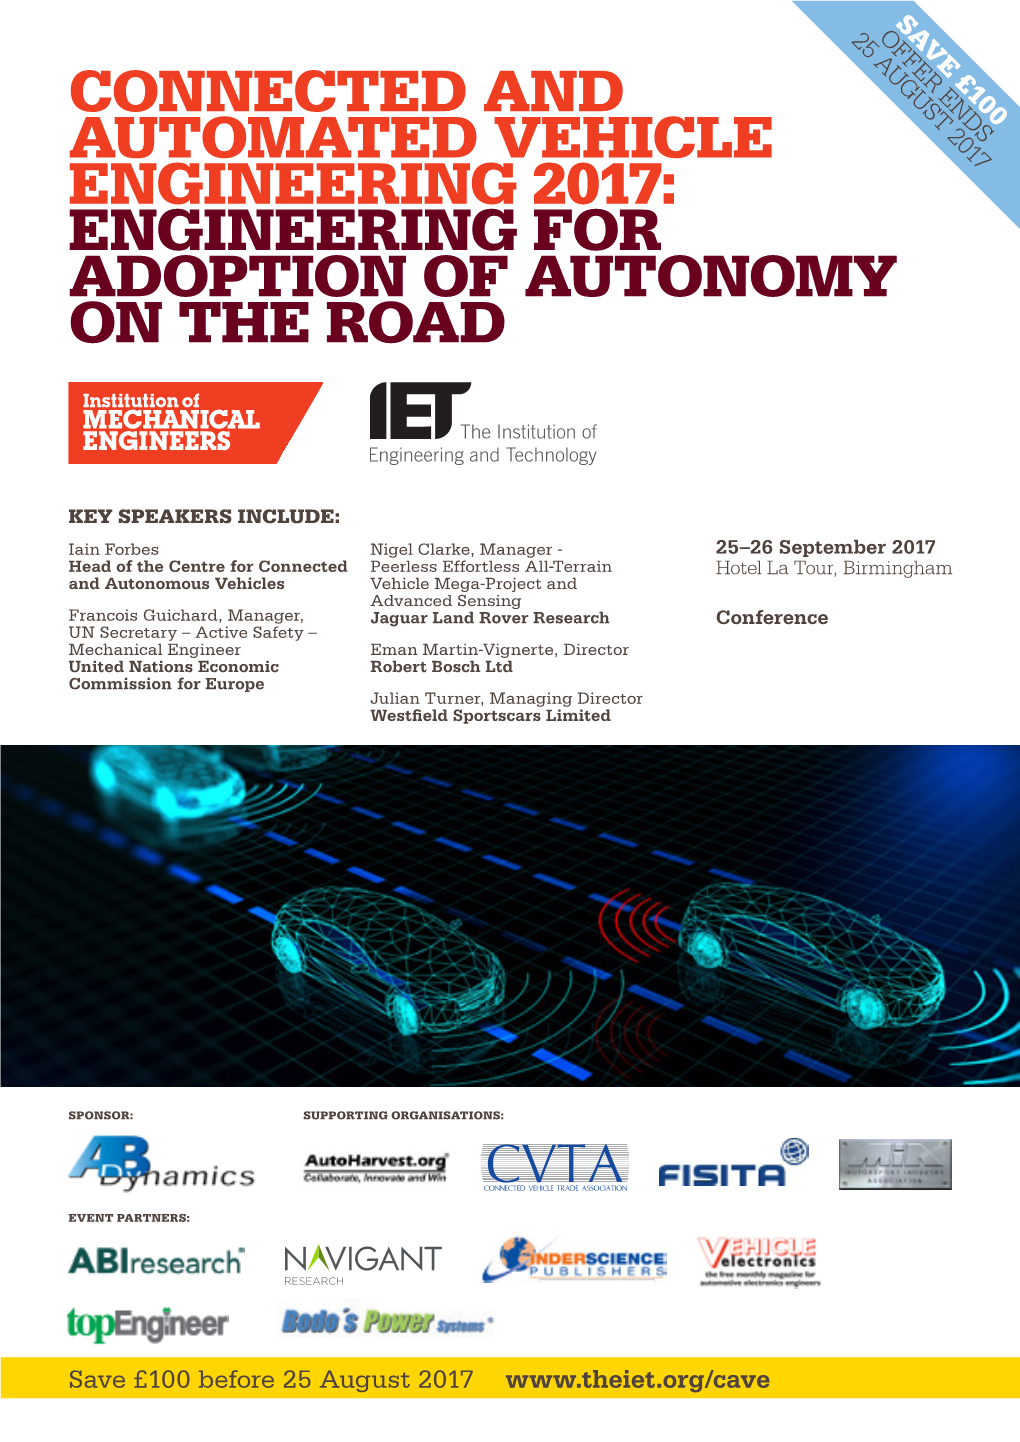 Connected and Automated Vehicle Engineering 2017: Engineering for Adoption of Autonomy on the Road